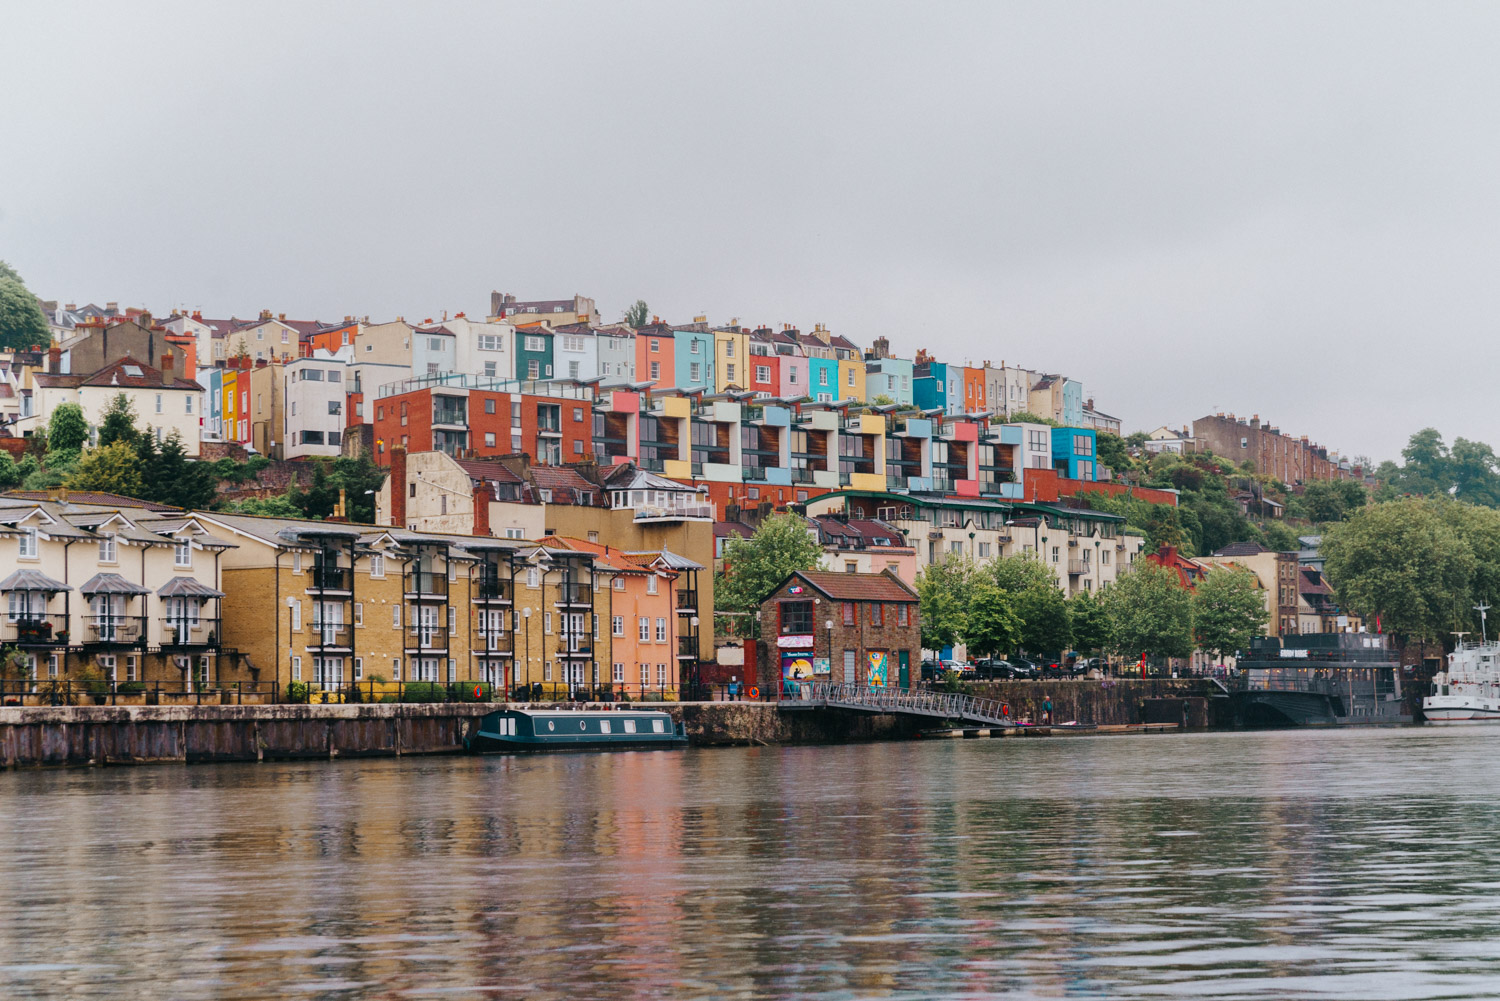 Bristol Harbour | Things to do in Bristol, England - A Guide to Bristol